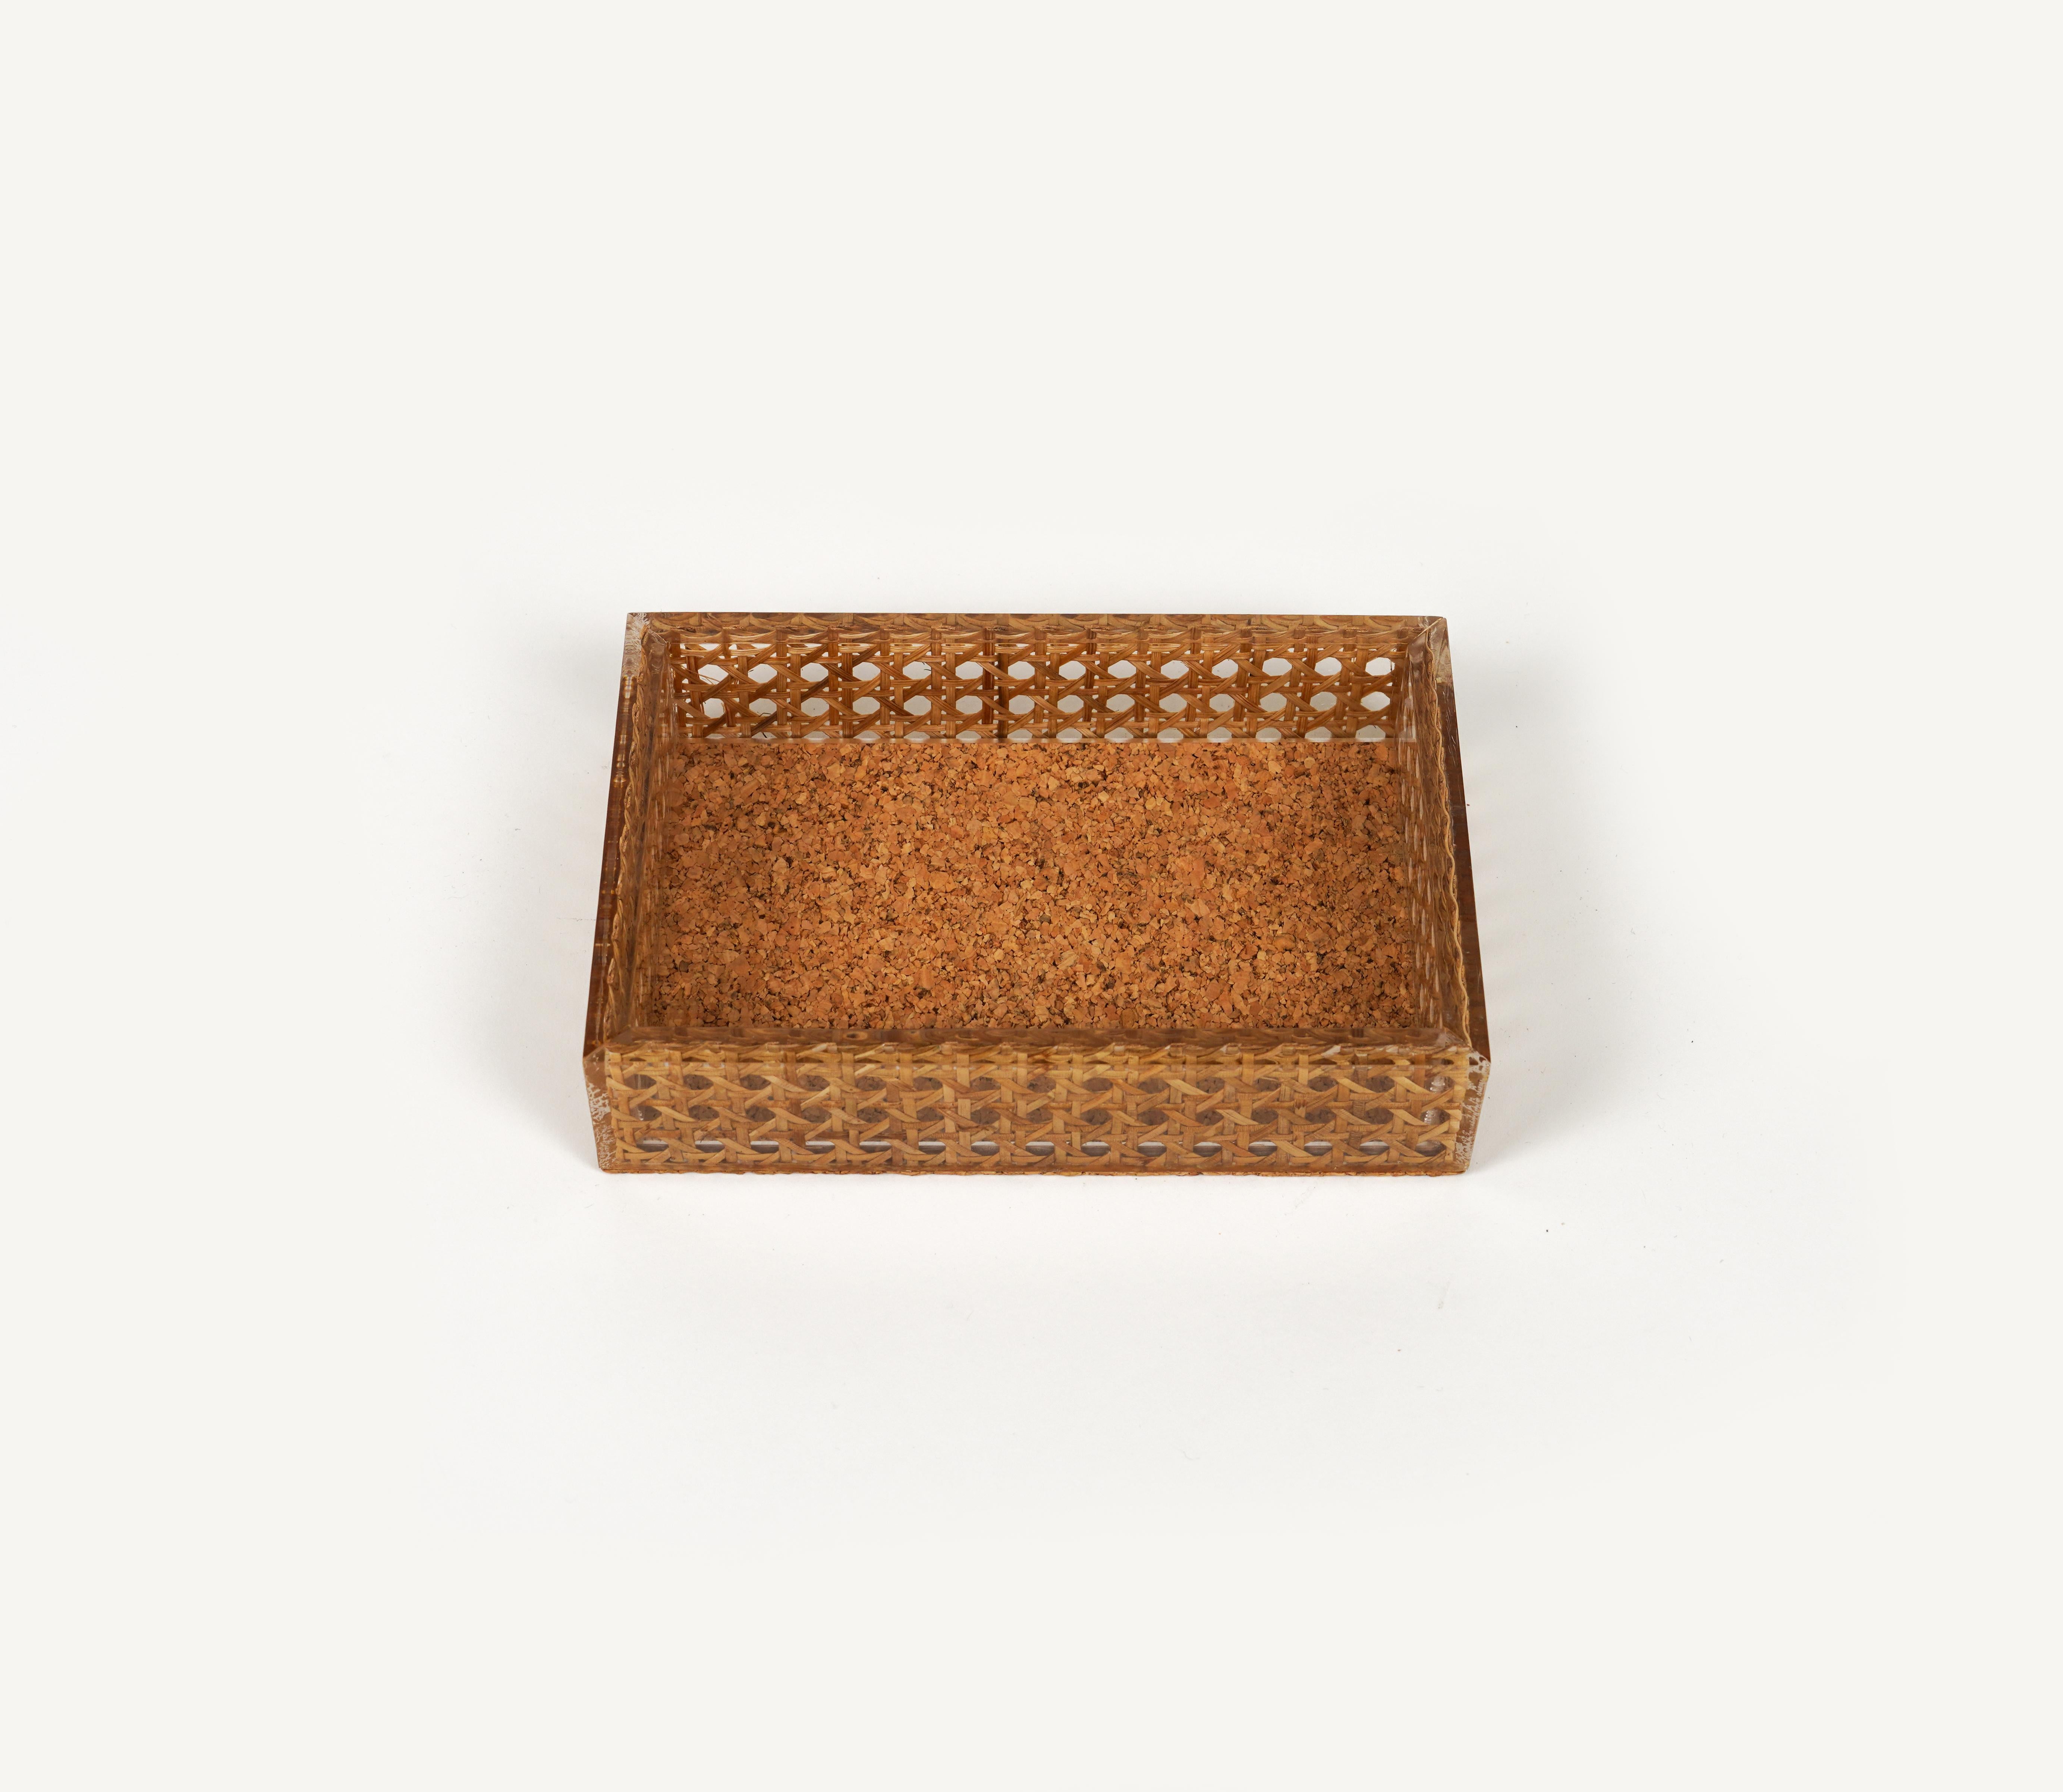 Midcentury Box in Rattan, Lucite and Cork Christian Dior Style, Italy 1970s For Sale 6